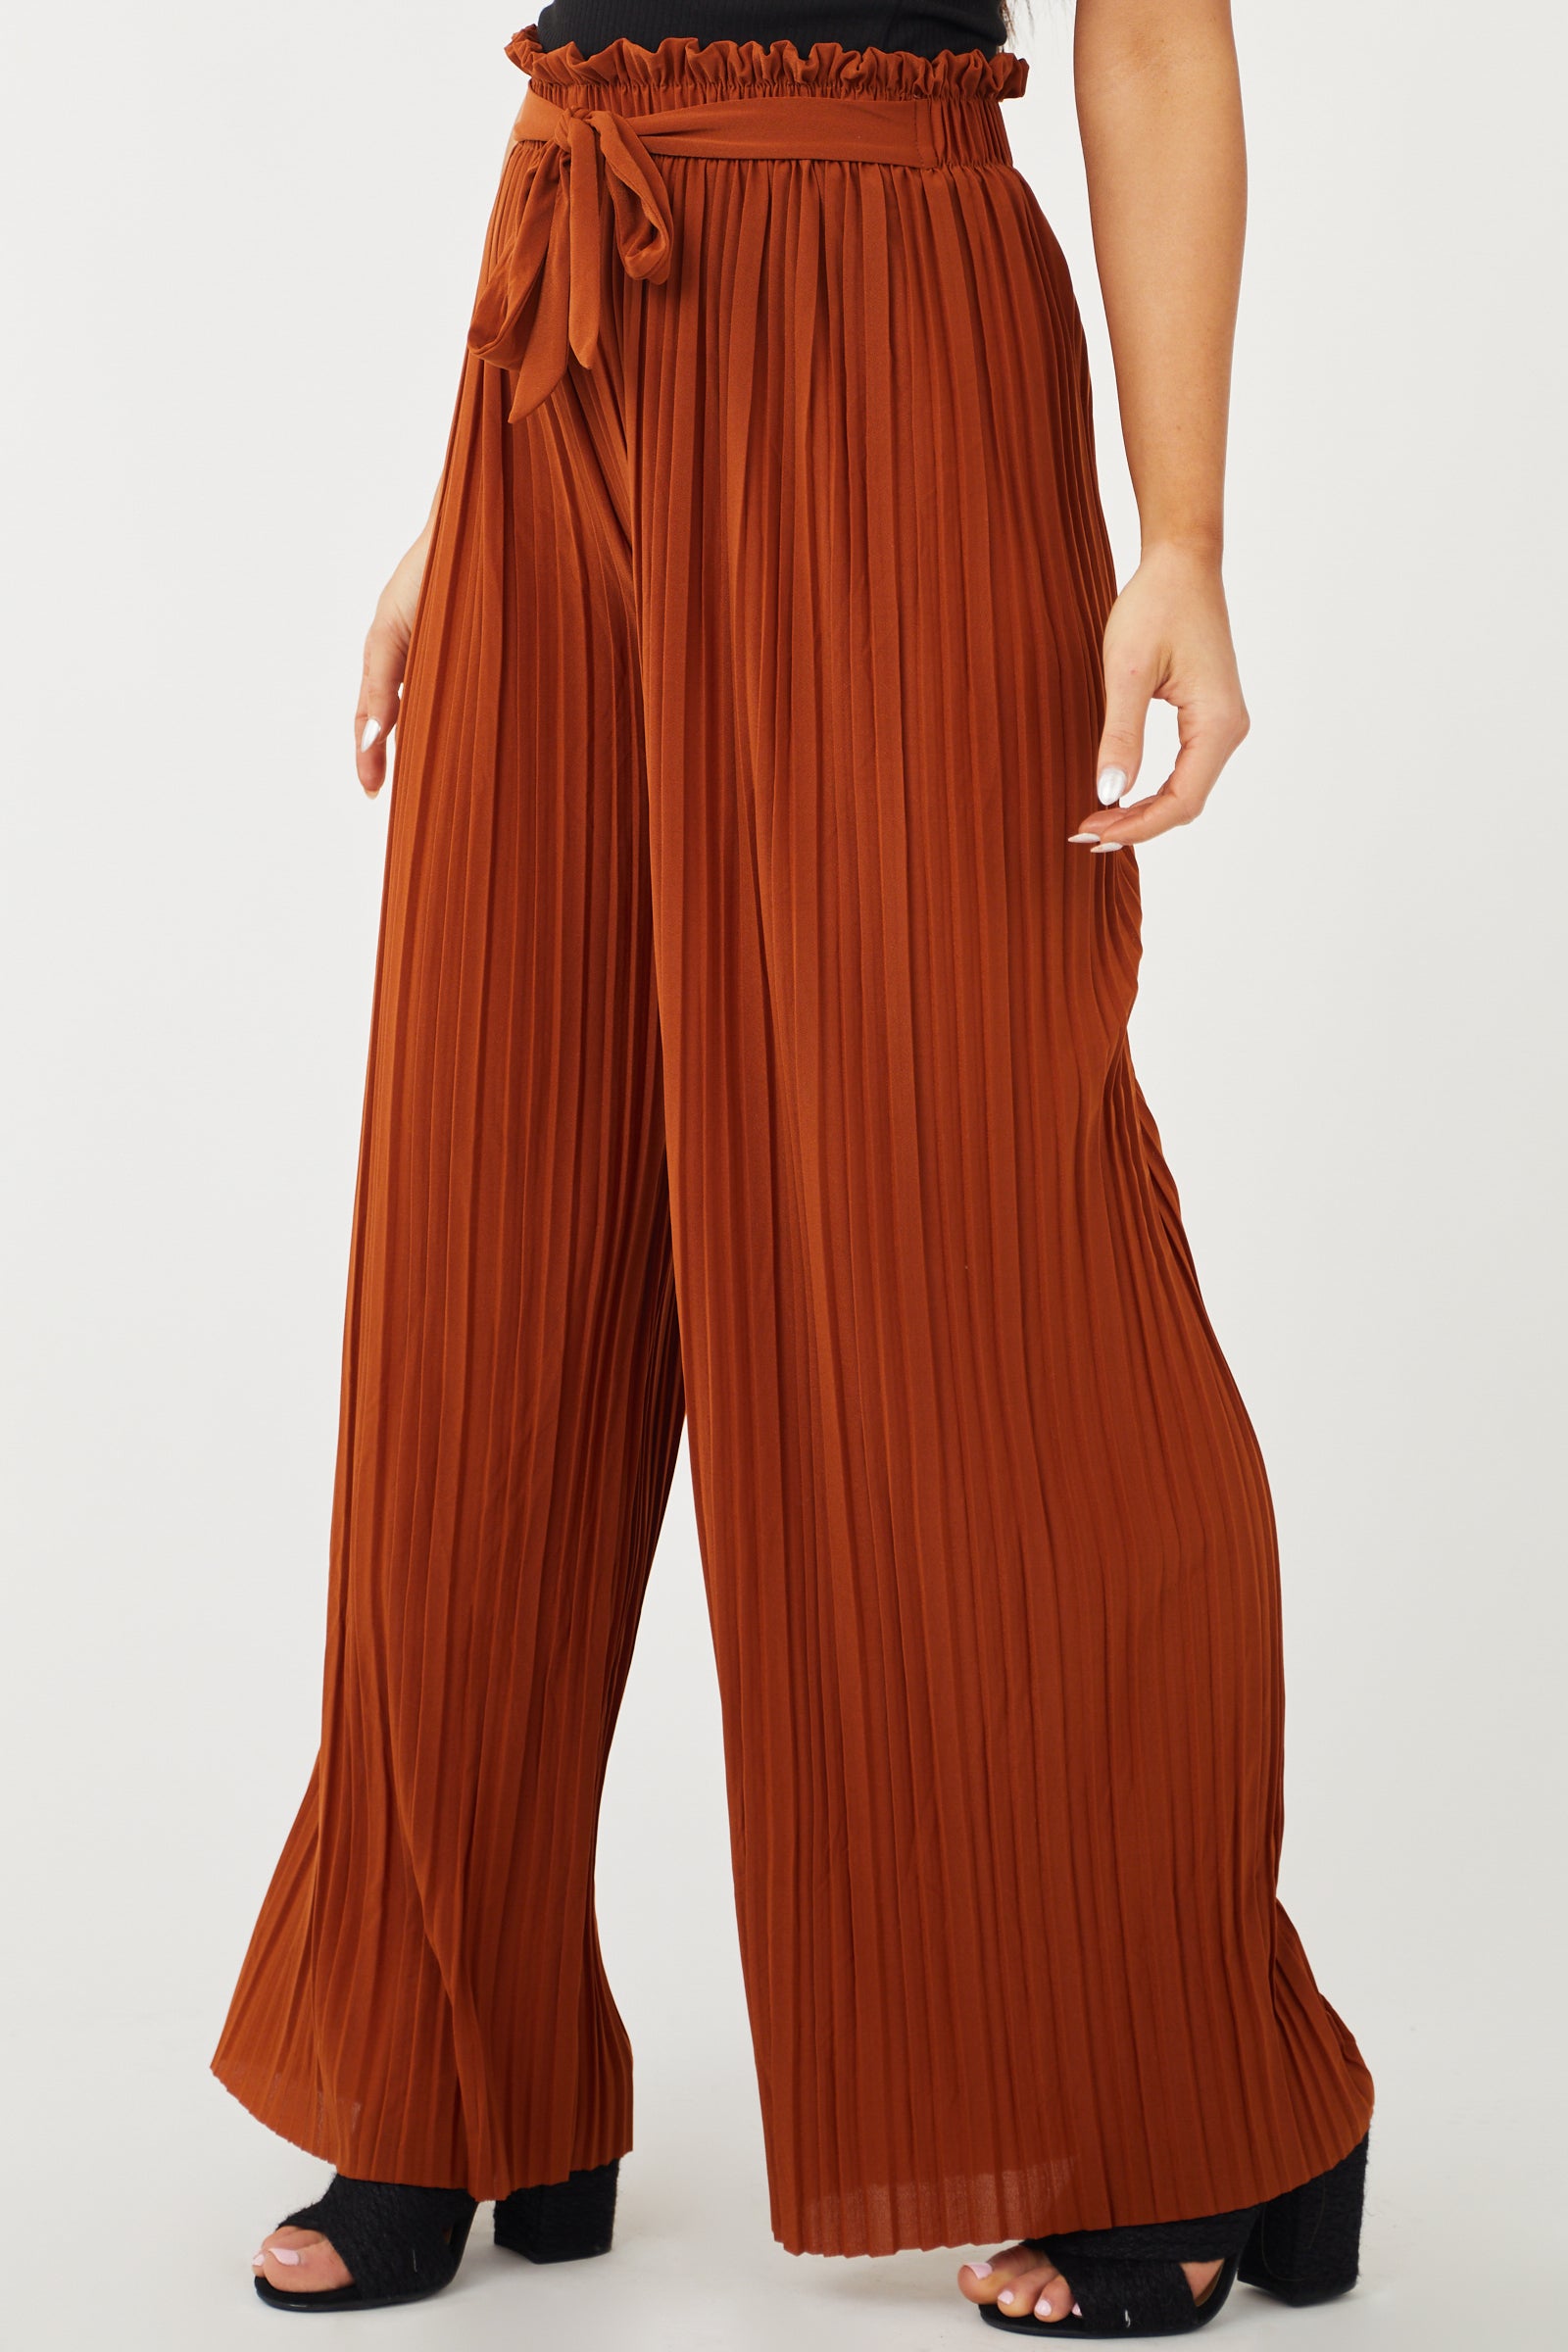 Accordion Pleated High Waist Wide Leg Pants with Pockets  Crawfords  Boutique